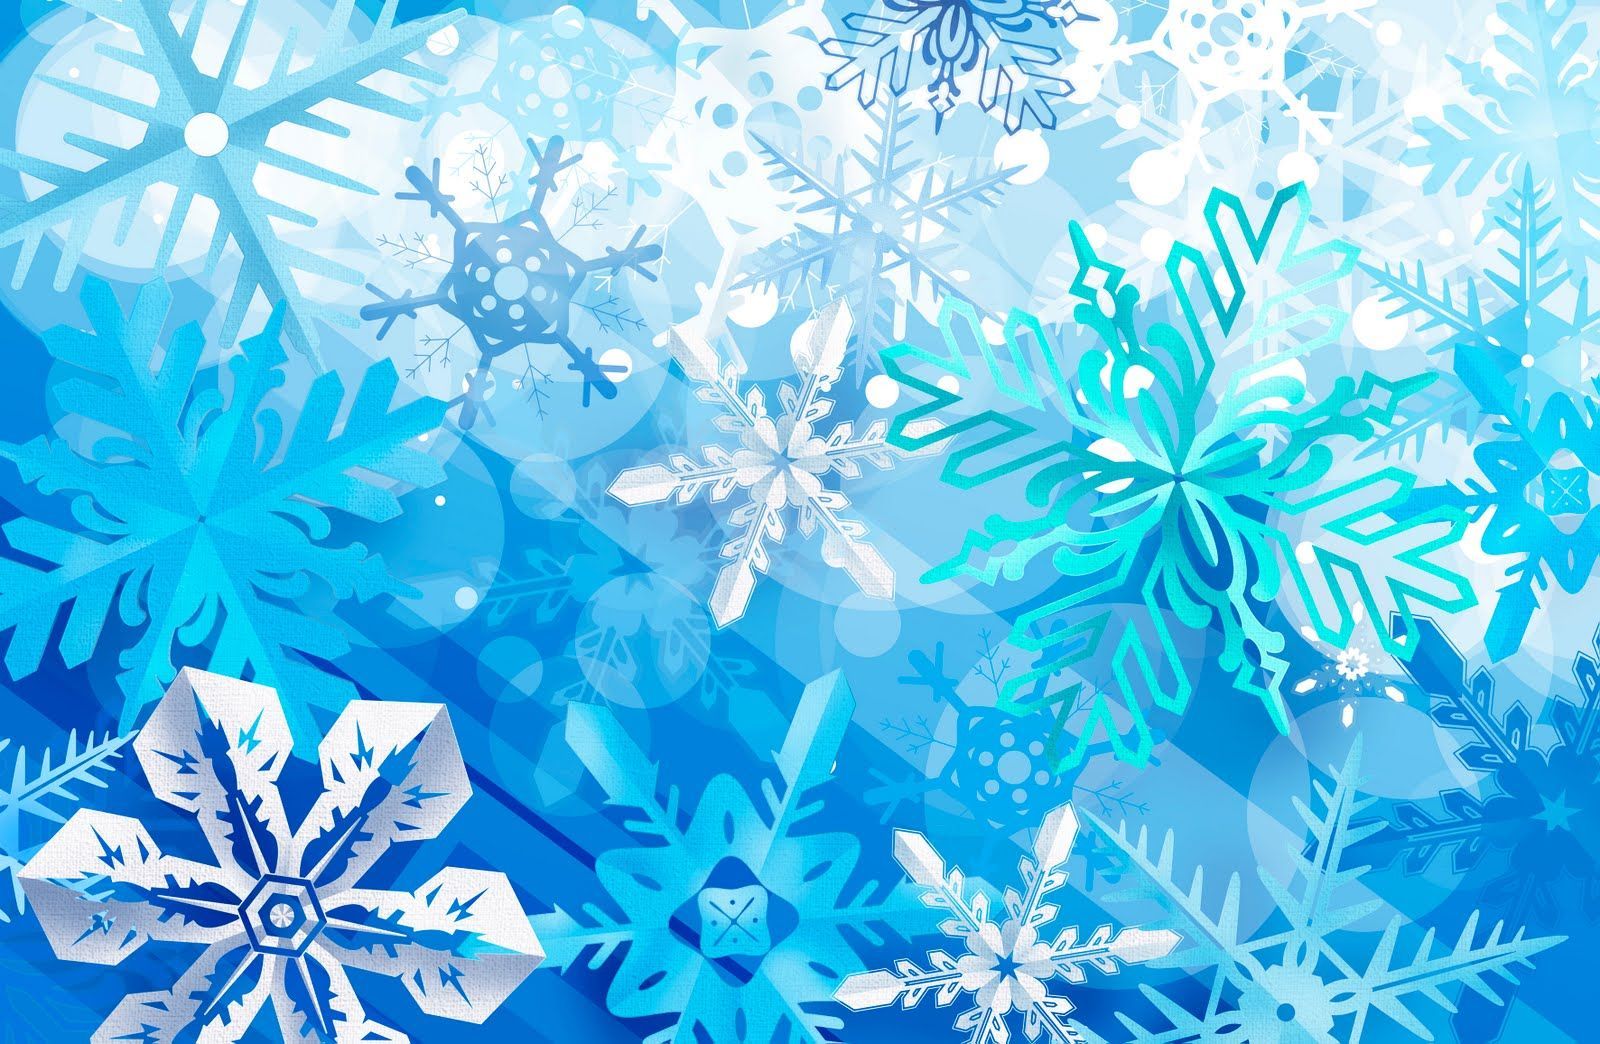 Free Christmas backgrounds - wallpapers, images, photos, pictures